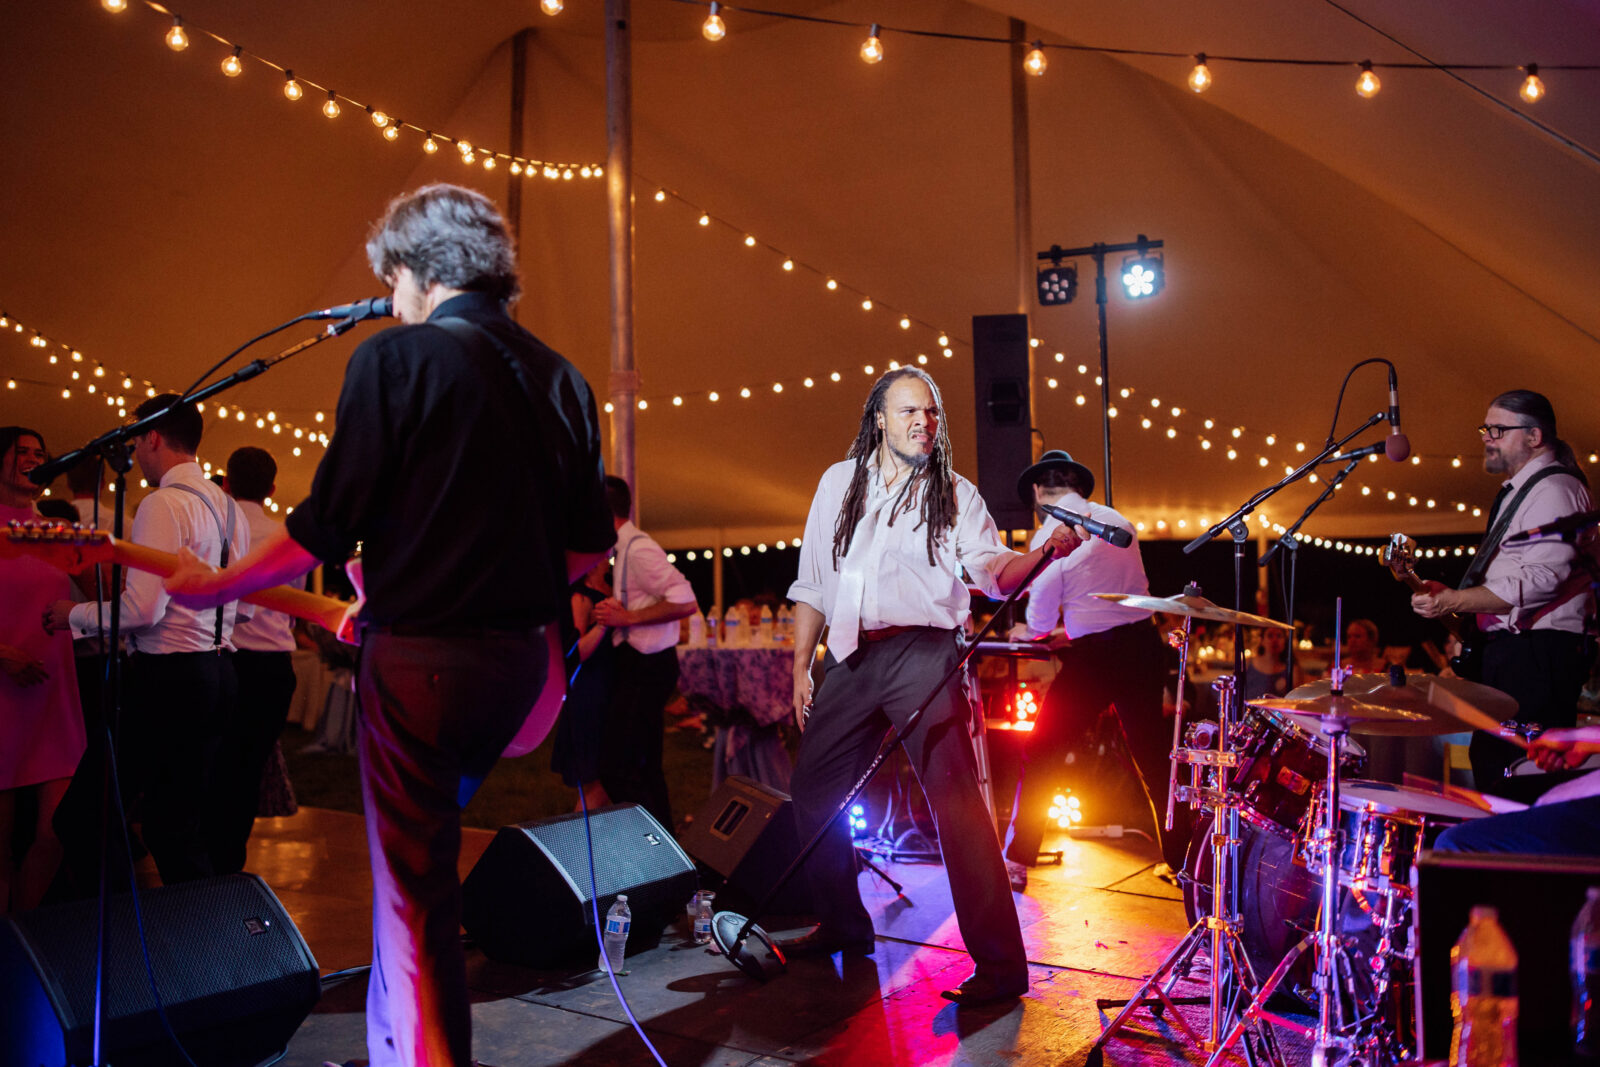 interactive live wedding band with cool lights and fun vibe. timeless and ambient